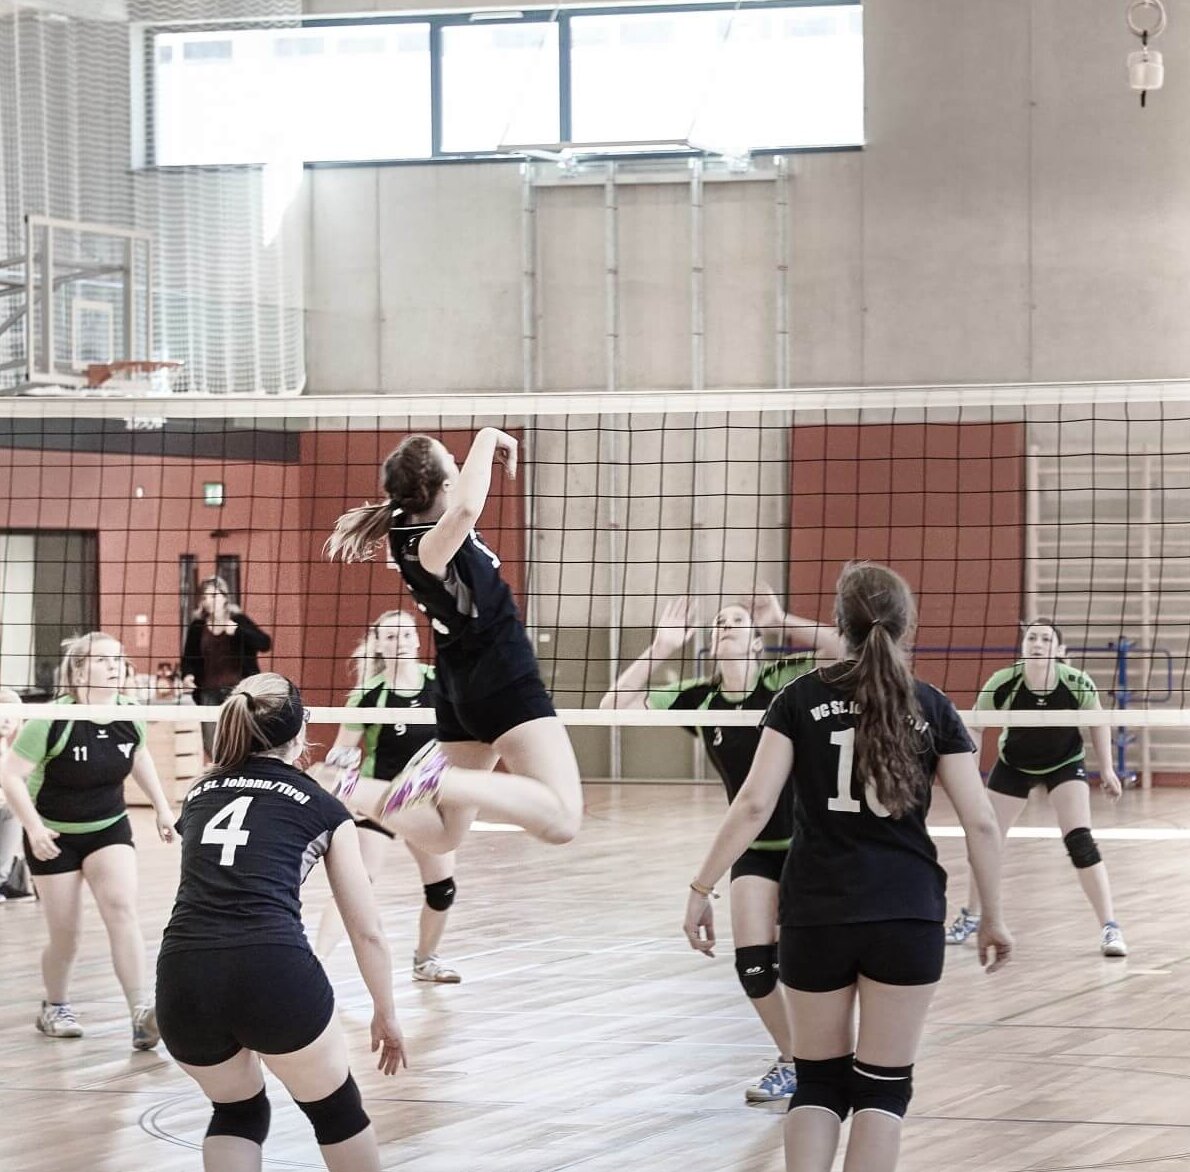 volleyball_sport_ball_play_competition_young_playing_field_ball_sports-850472.jpg!d